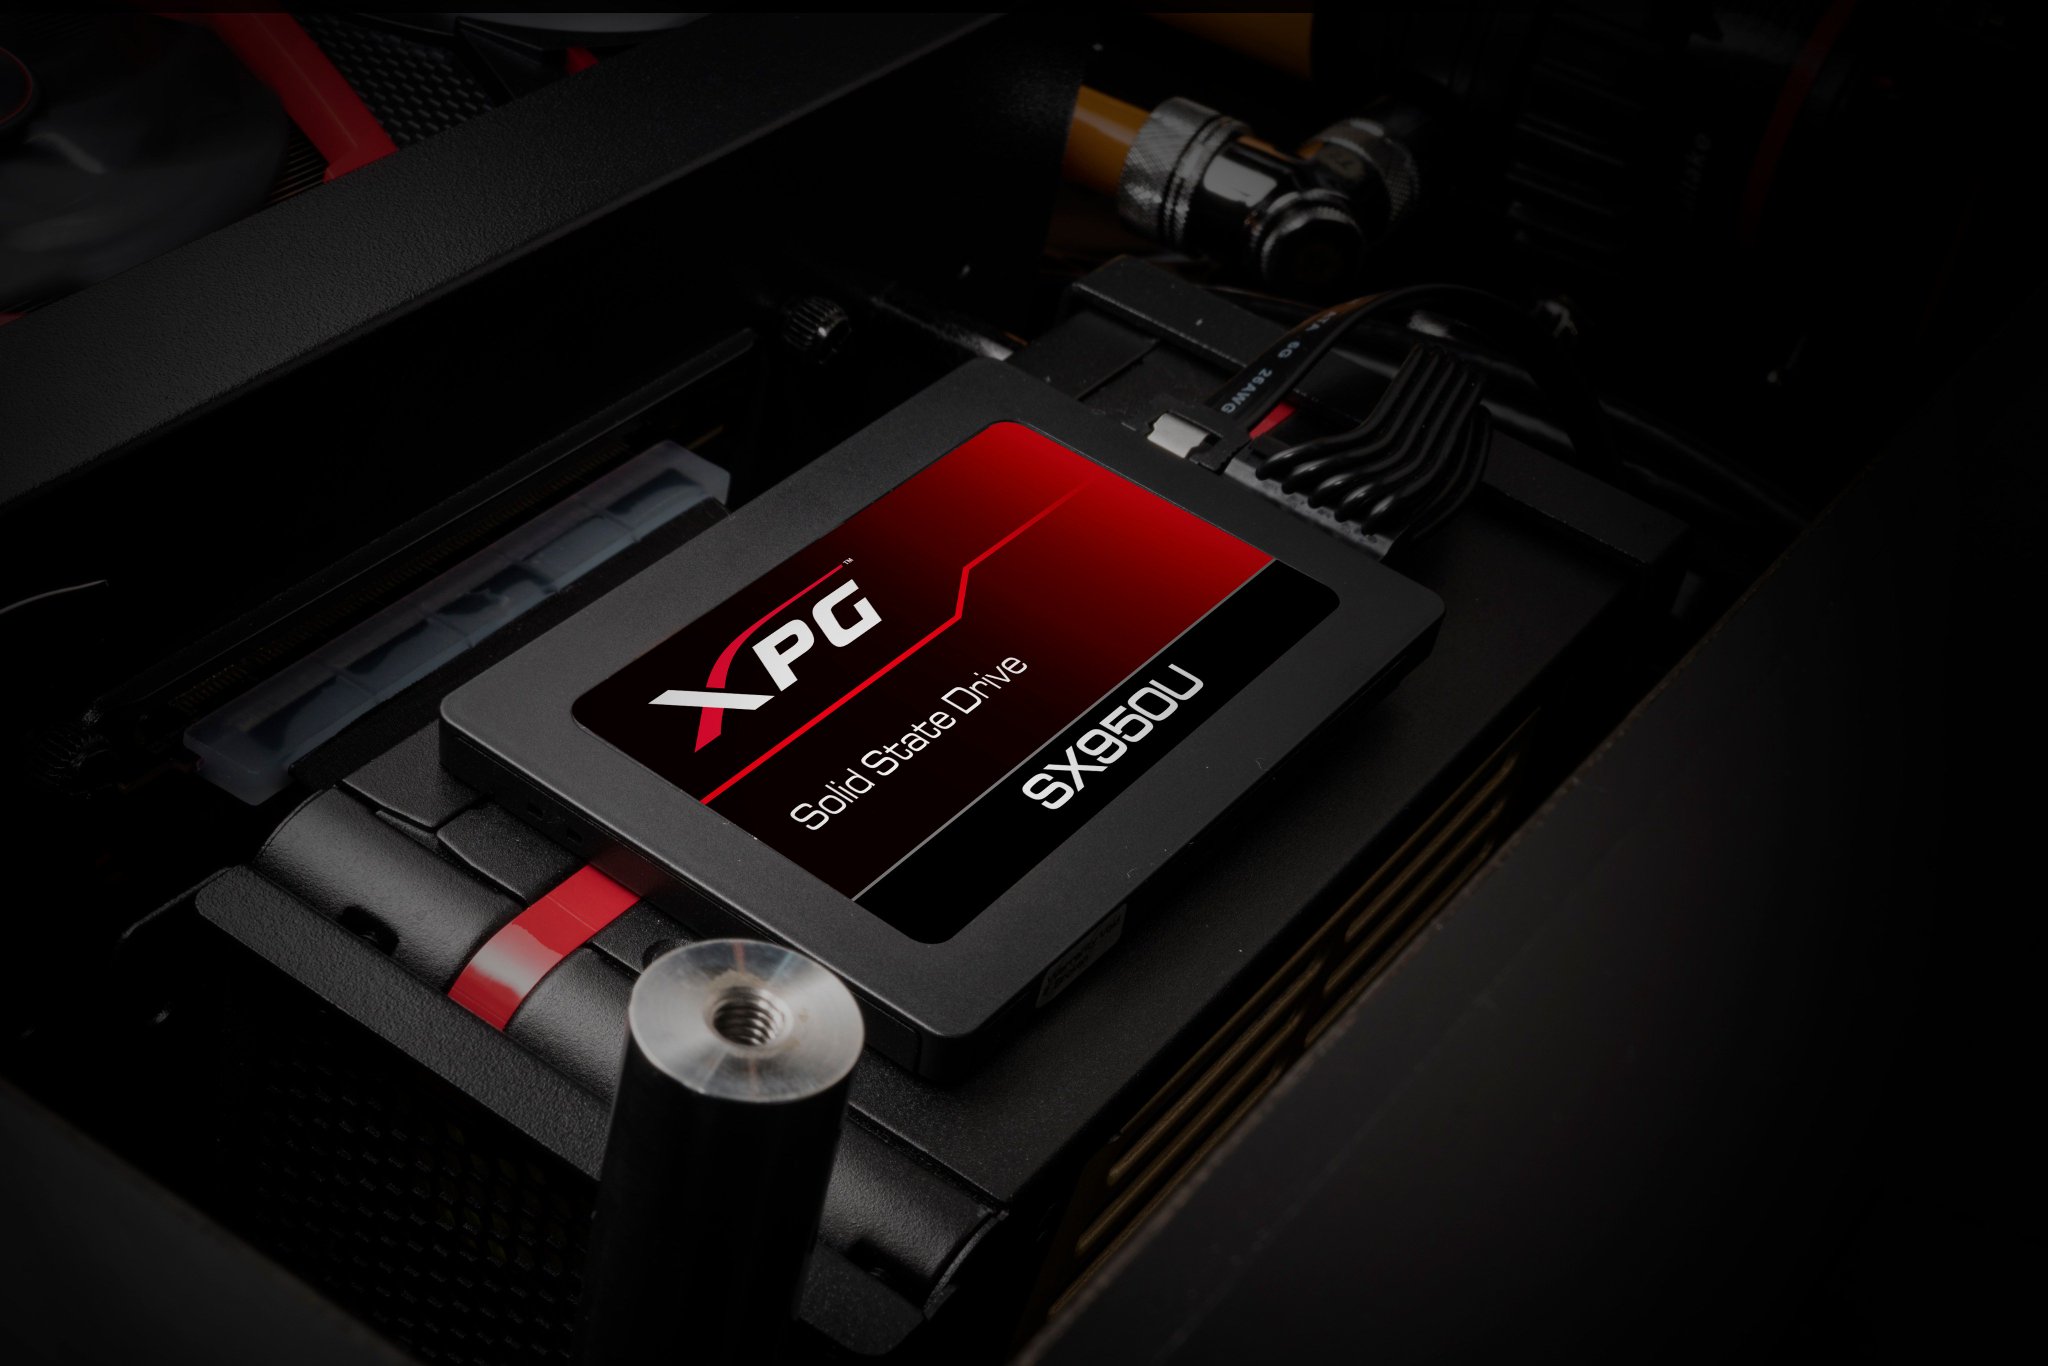 And team boycott hawk ADATA Technology on Twitter: "We are happy to Introduce our new SX950U, a  SSD developed specifically for gamers using 3D NAND Flash to reach larger  capacities of up to 960GB. Follow us